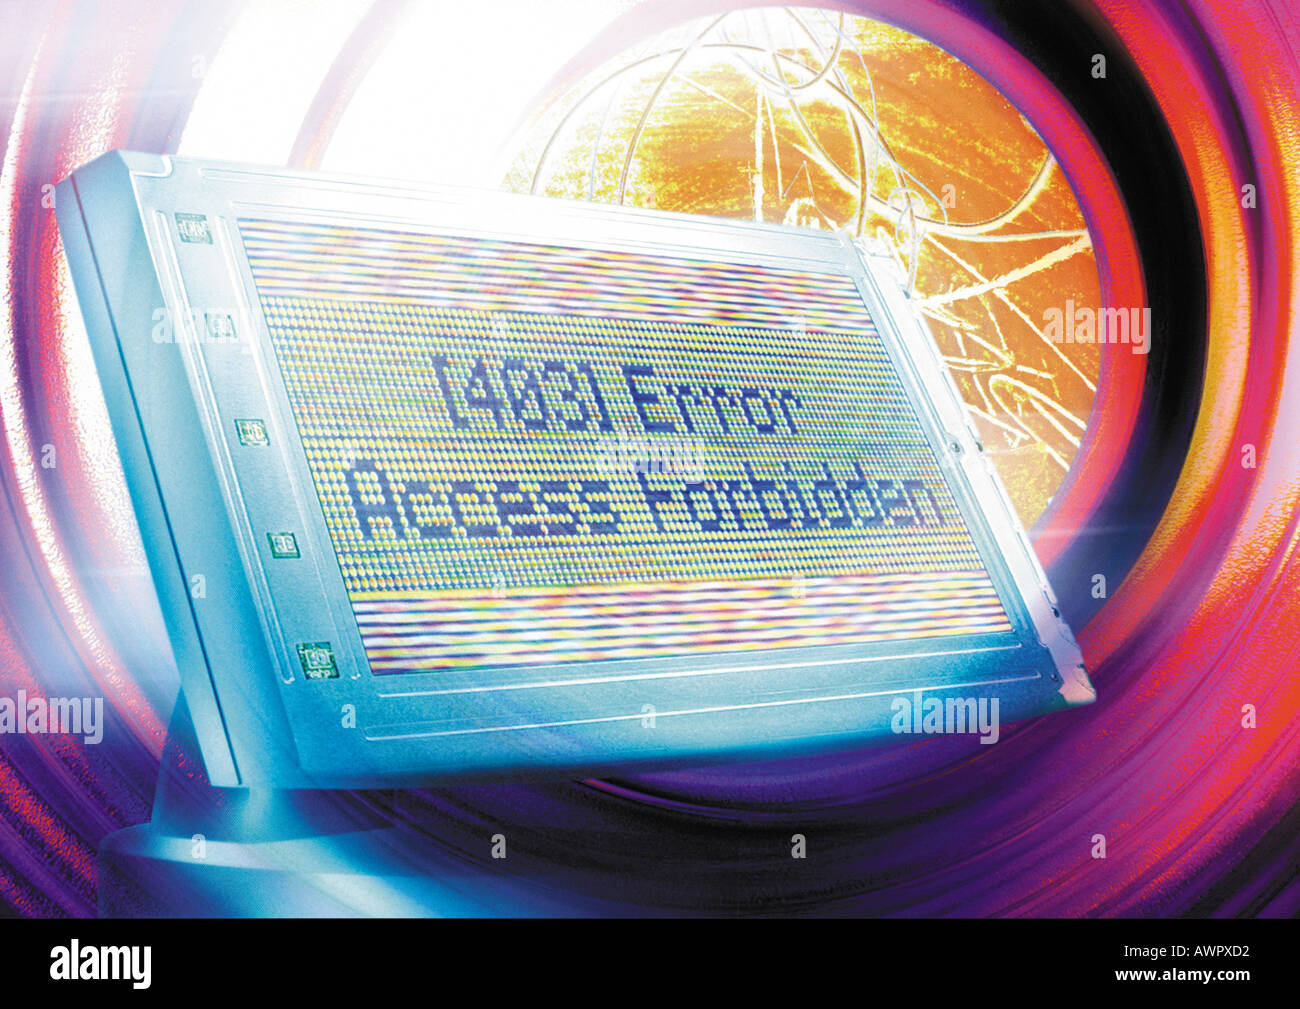 Computer monitor floating in cyberspace, 'Error' message on screen, digital composite. Stock Photo